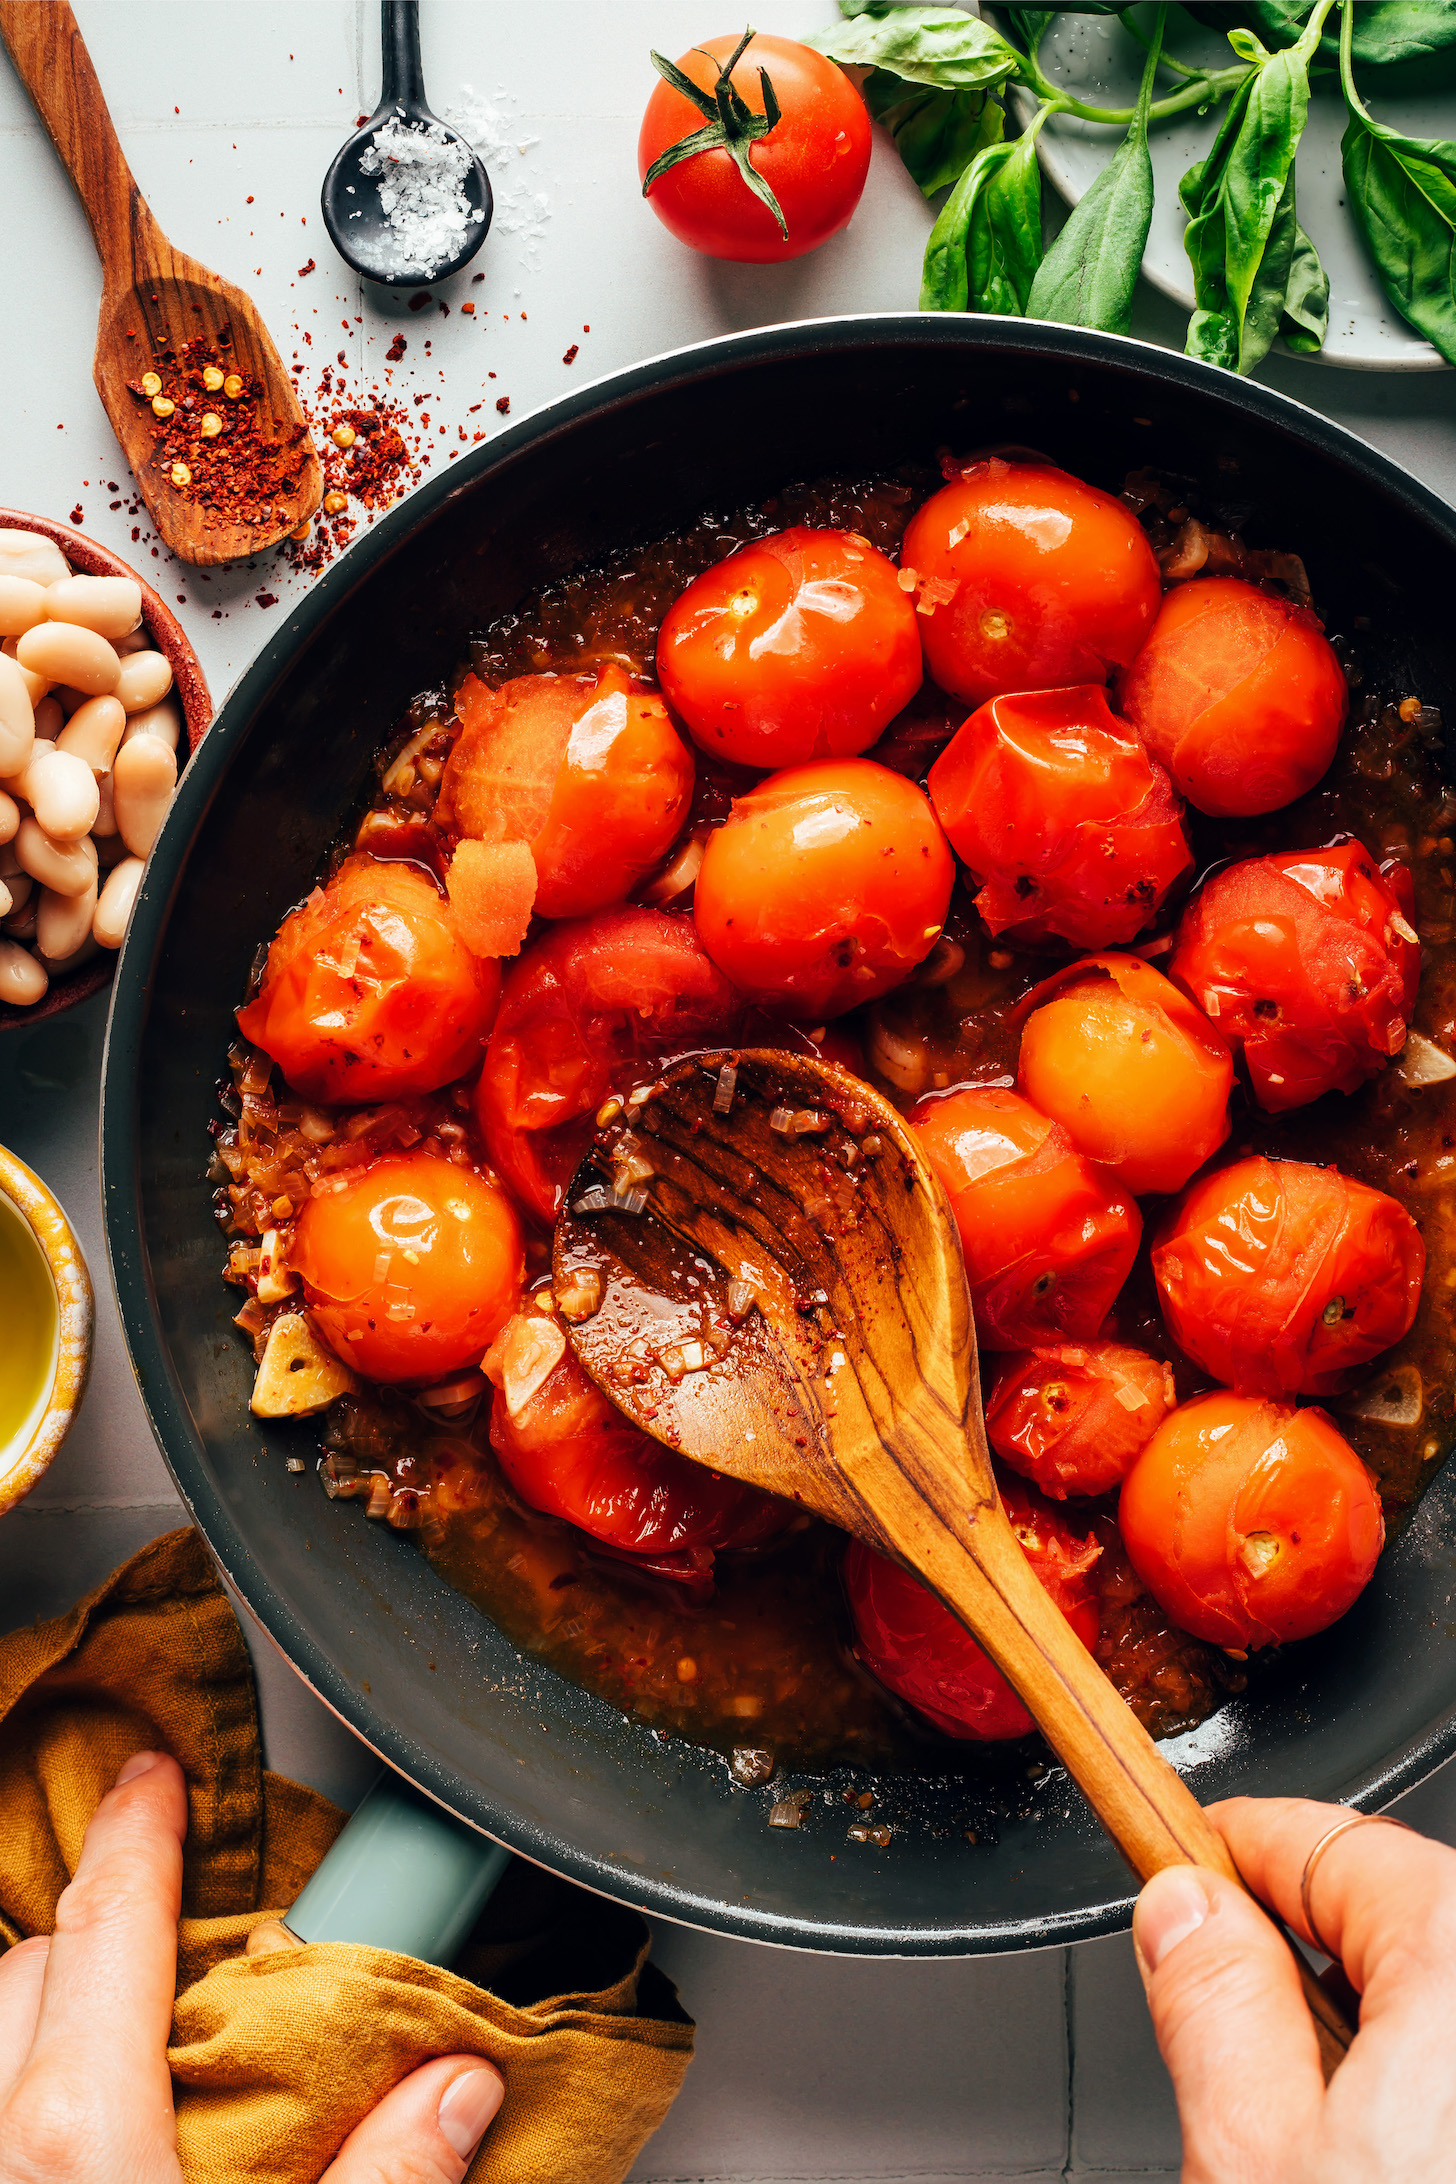 Burst cherry tomatoes in a skillet